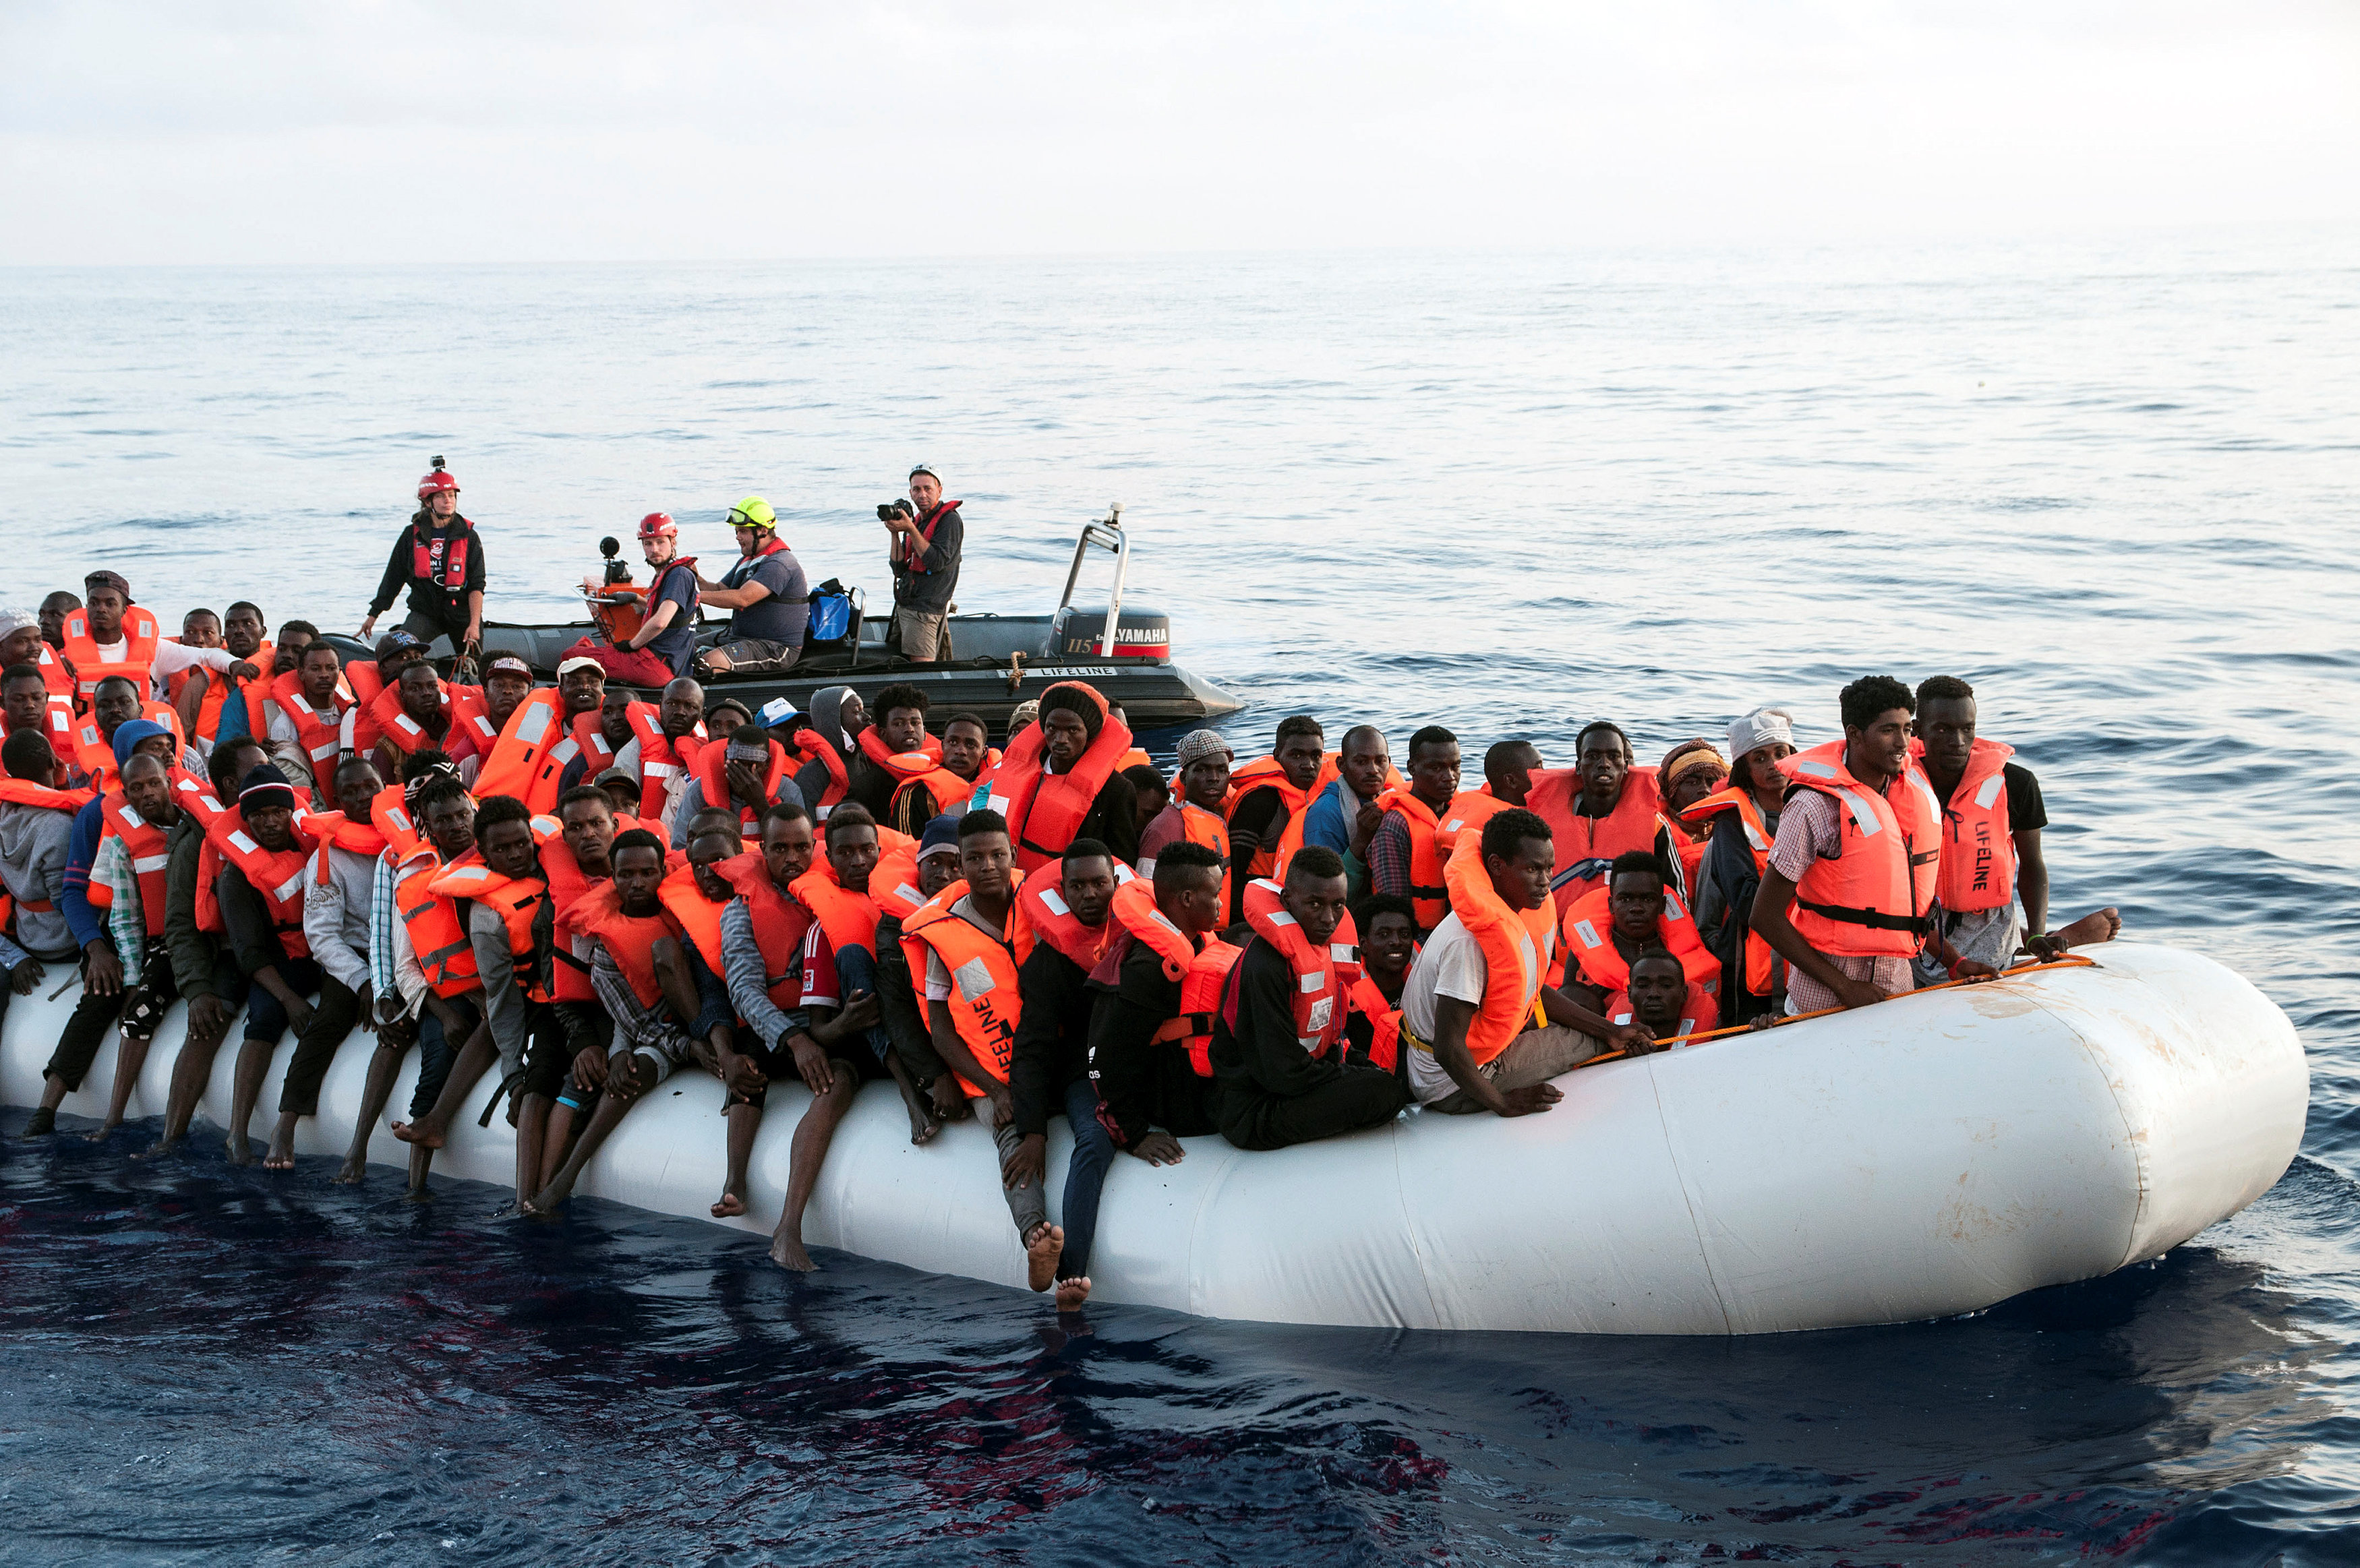 Migrants are seen in a rubber dinghy as they are rescued by the crew of the Mission Lifeline rescue boat in the central Mediterranean Sea